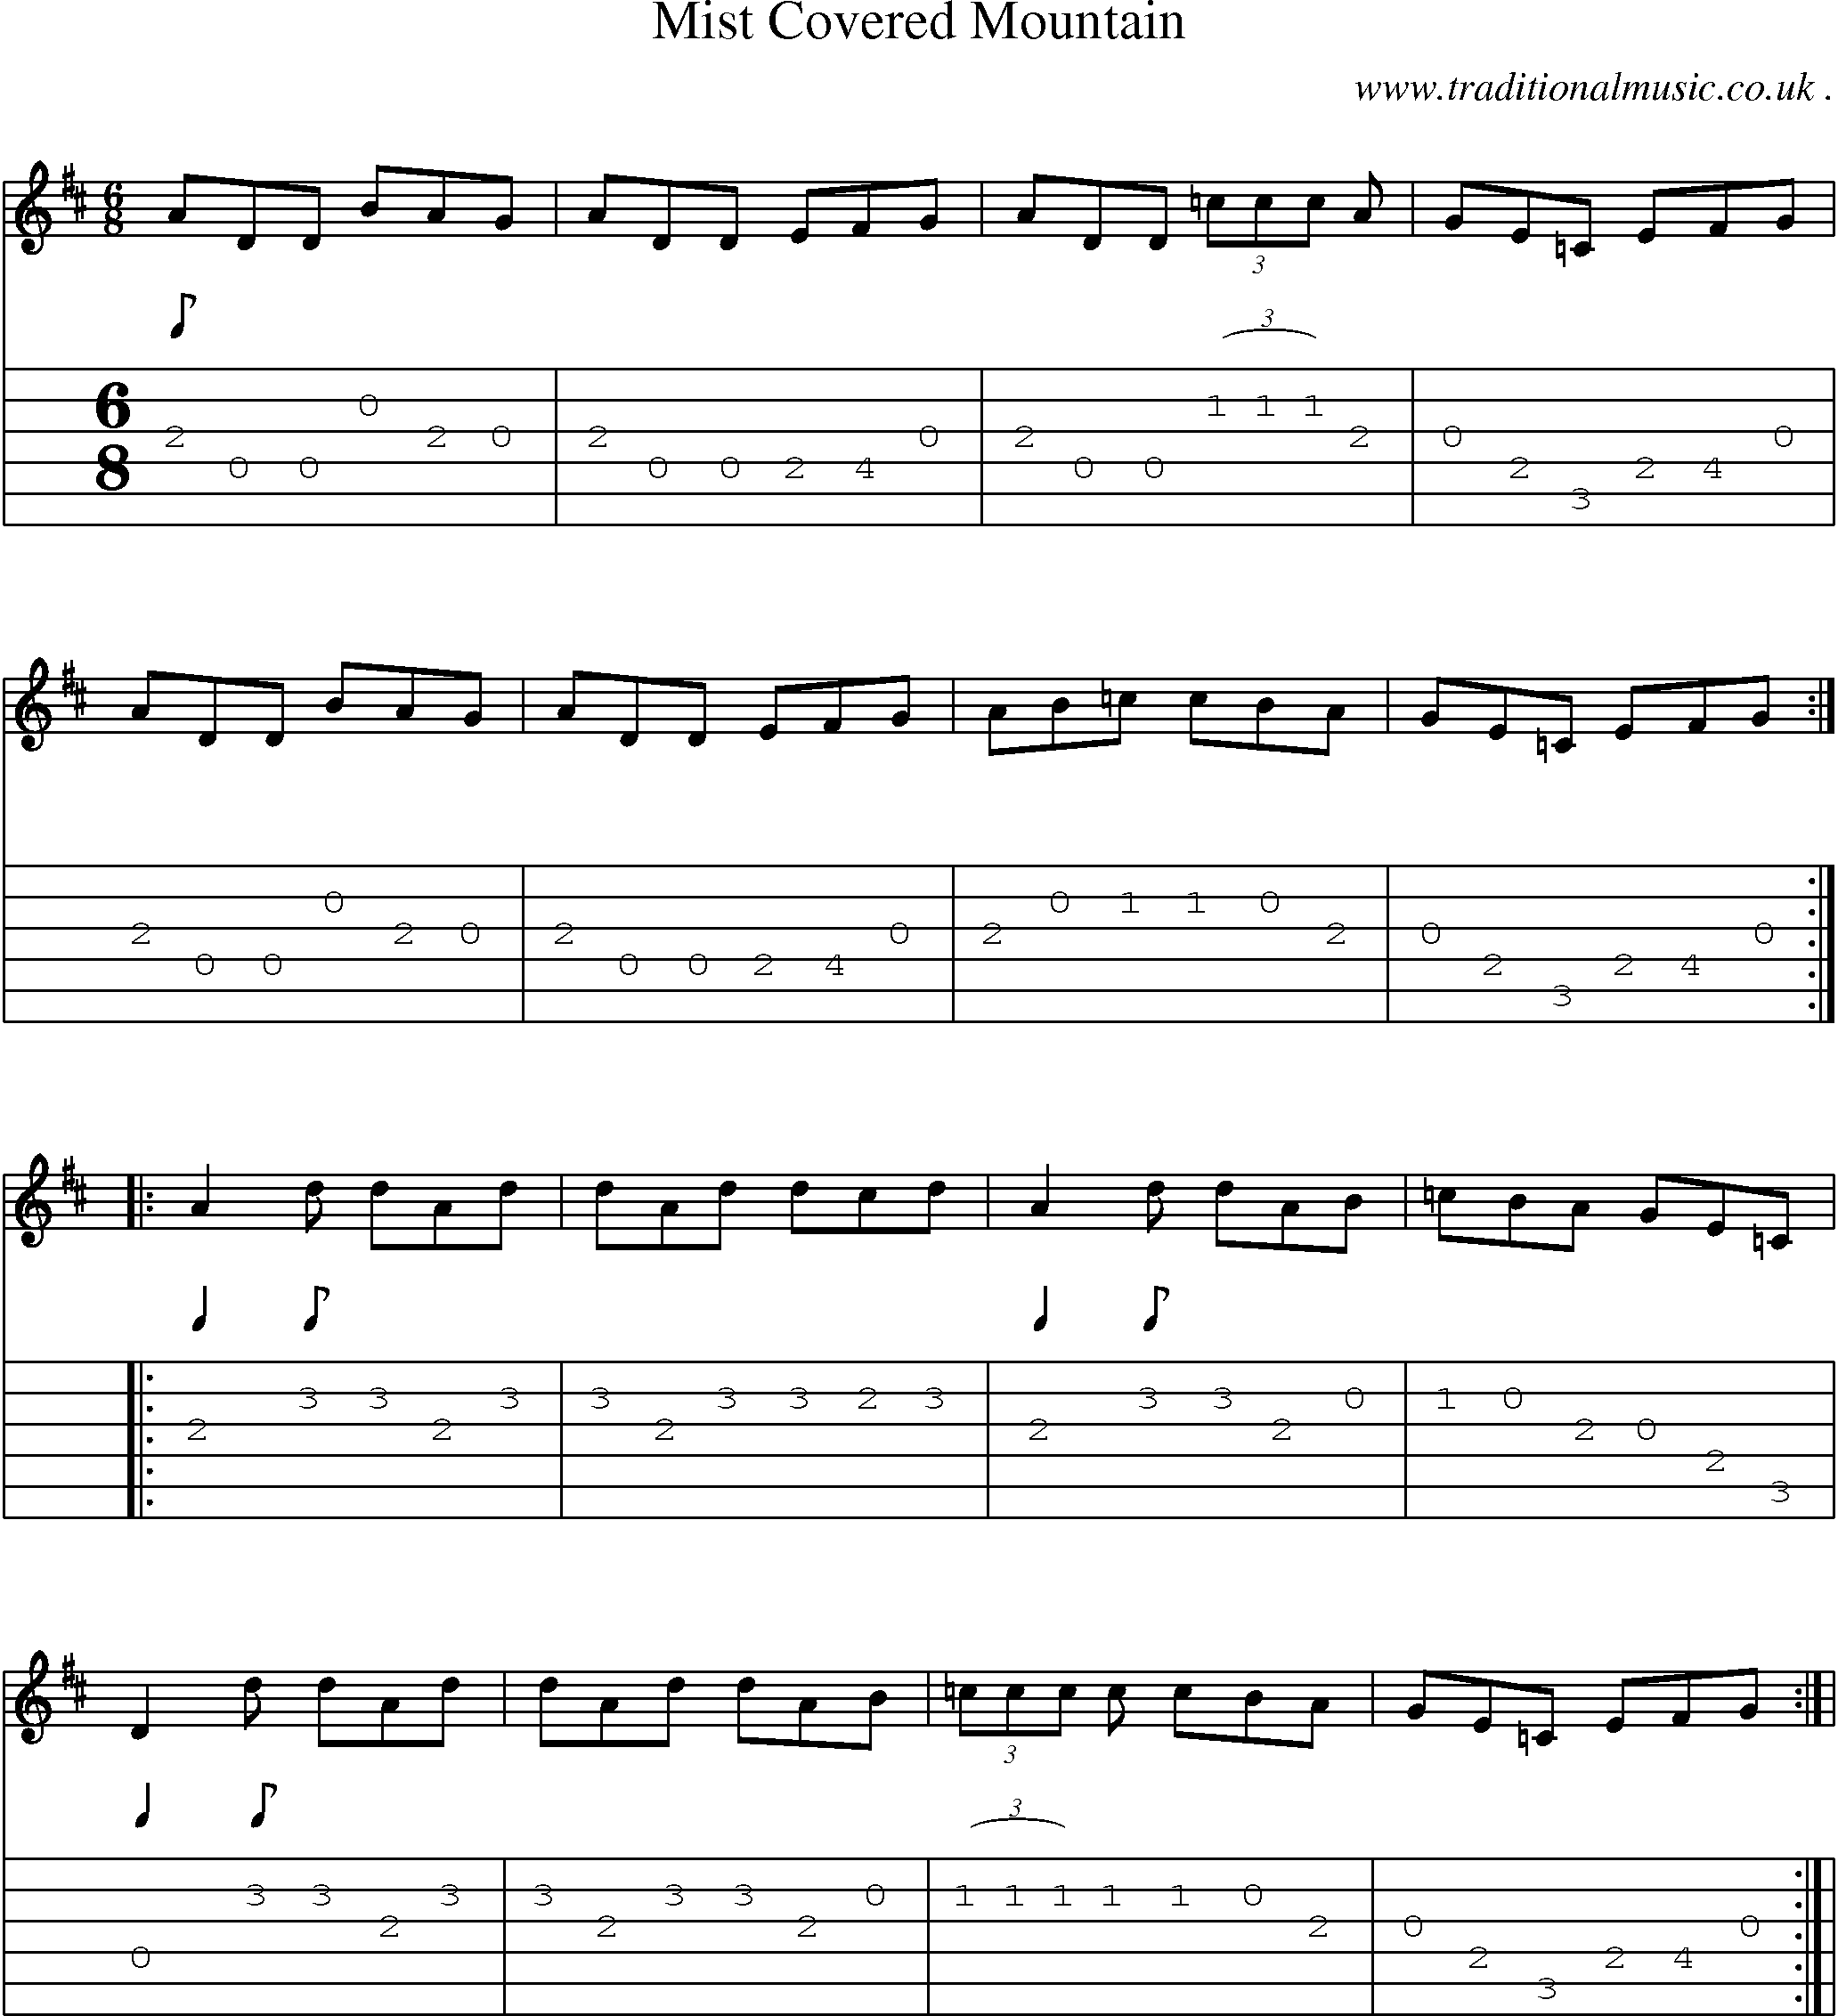 Sheet-Music and Guitar Tabs for Mist Covered Mountain